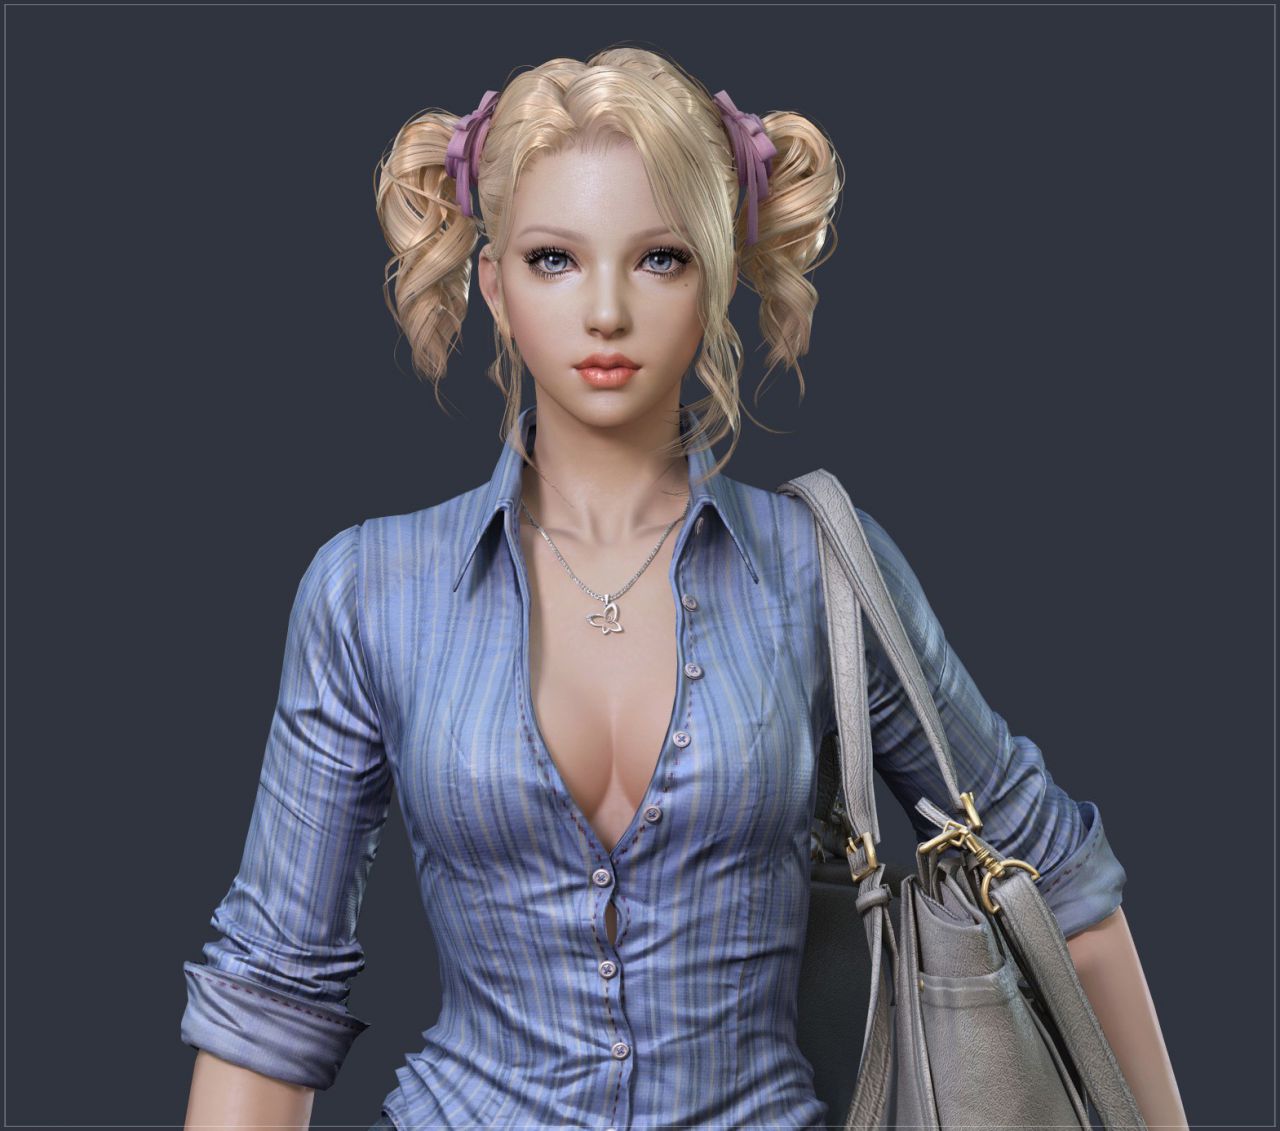 BLONDE(Realtime character)